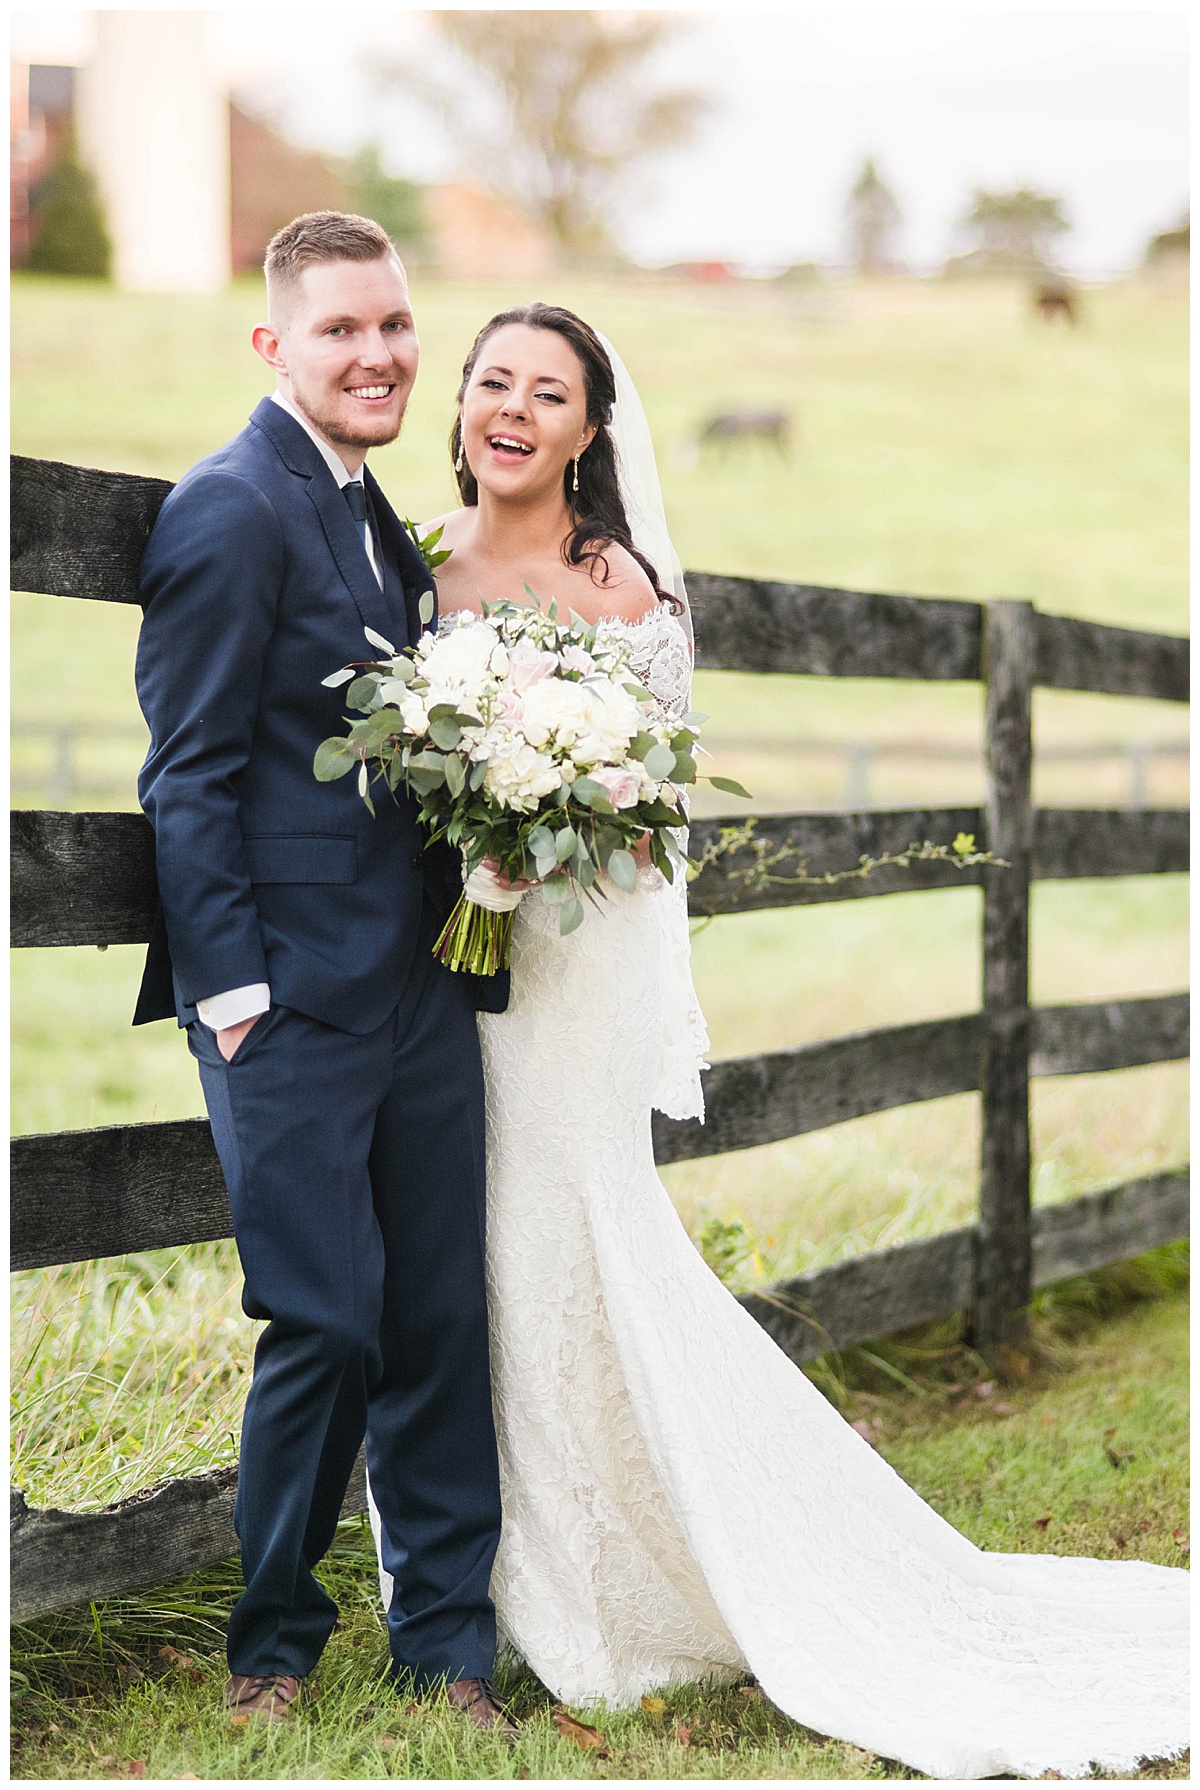 8 Chains North Winery Wedding: bride and groom, laughing, outdoors, white wedding dress with veil, navy grooms suite, fence